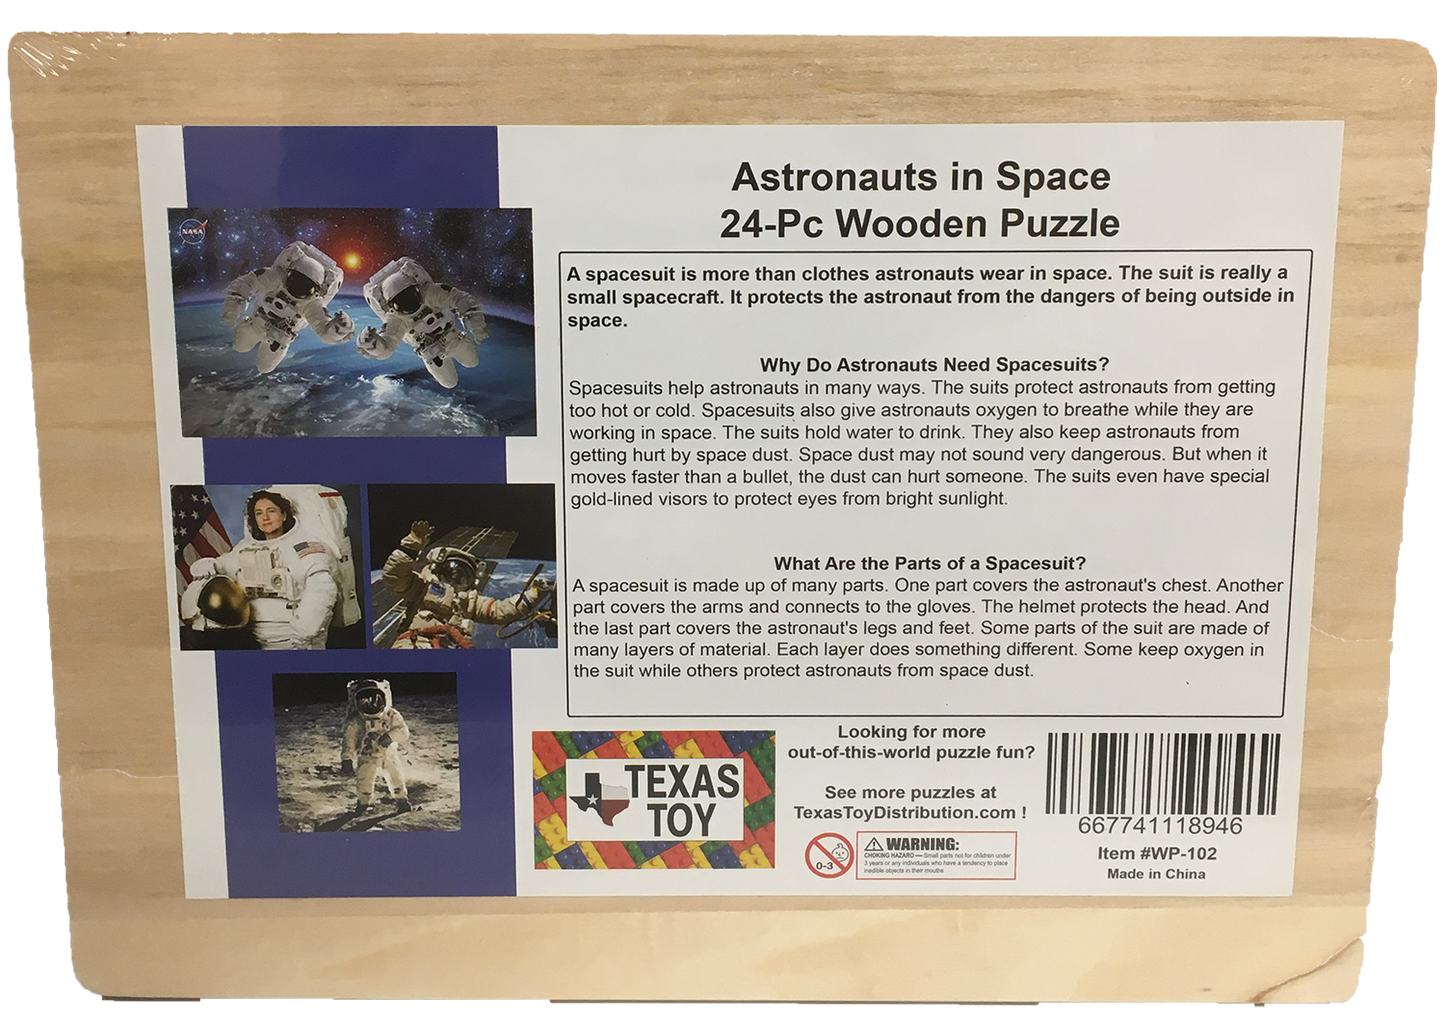 NASA Astronauts in Space Wood Jigsaw Puzzle - 24 Pcs